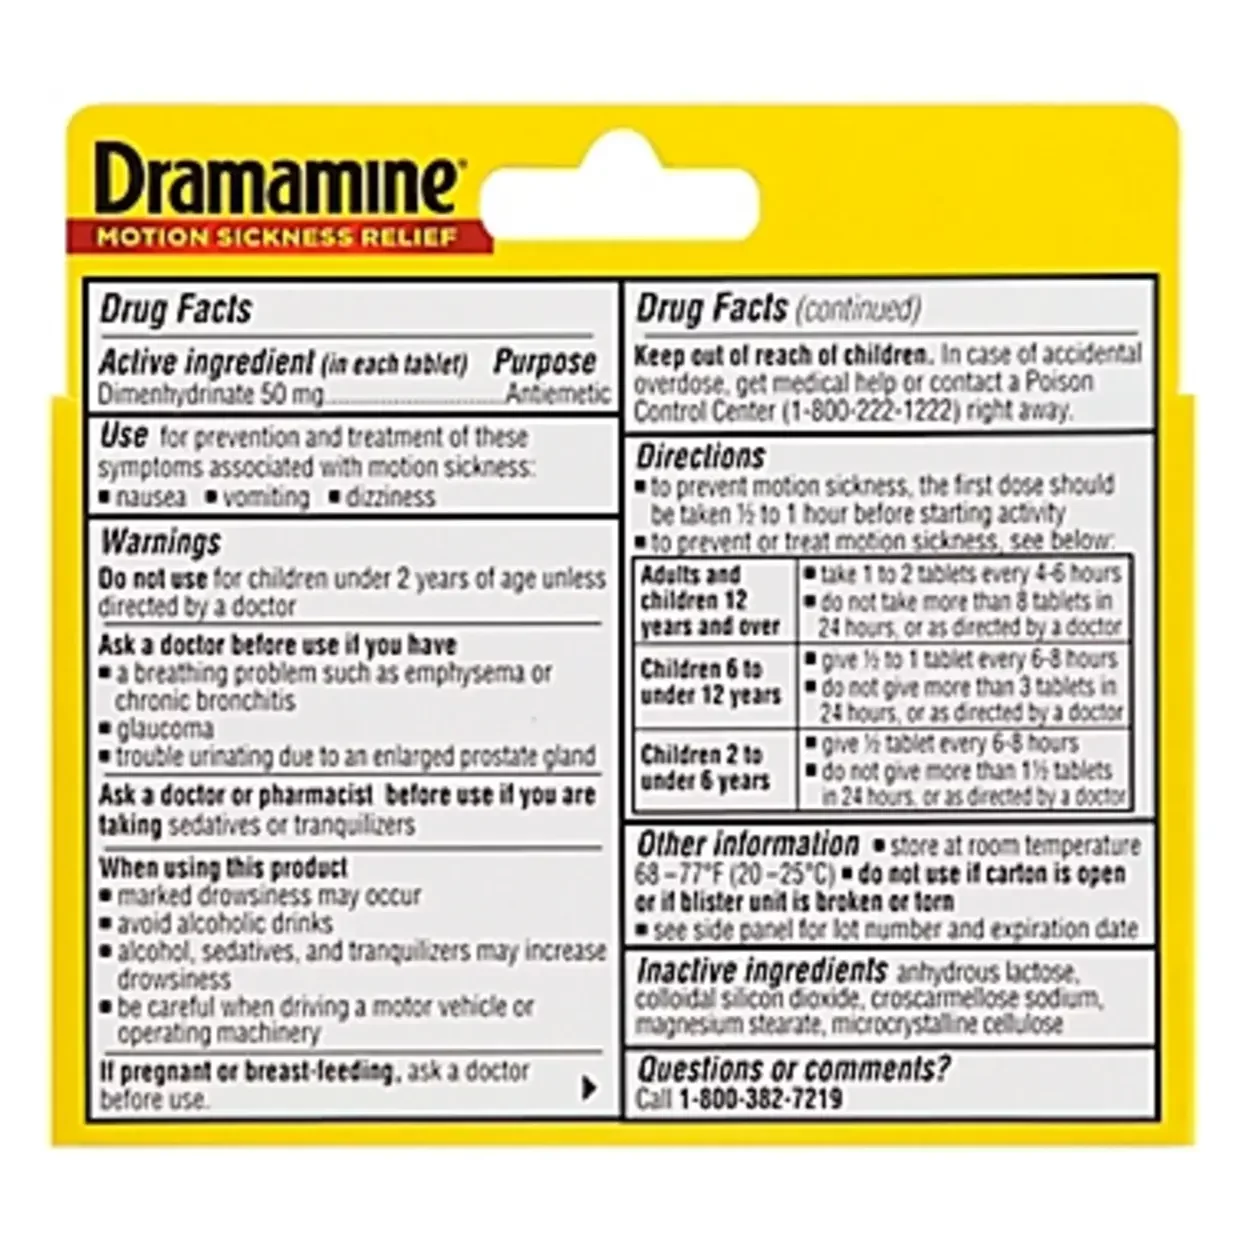 The primary component of Dramamine is dimenhydrinate